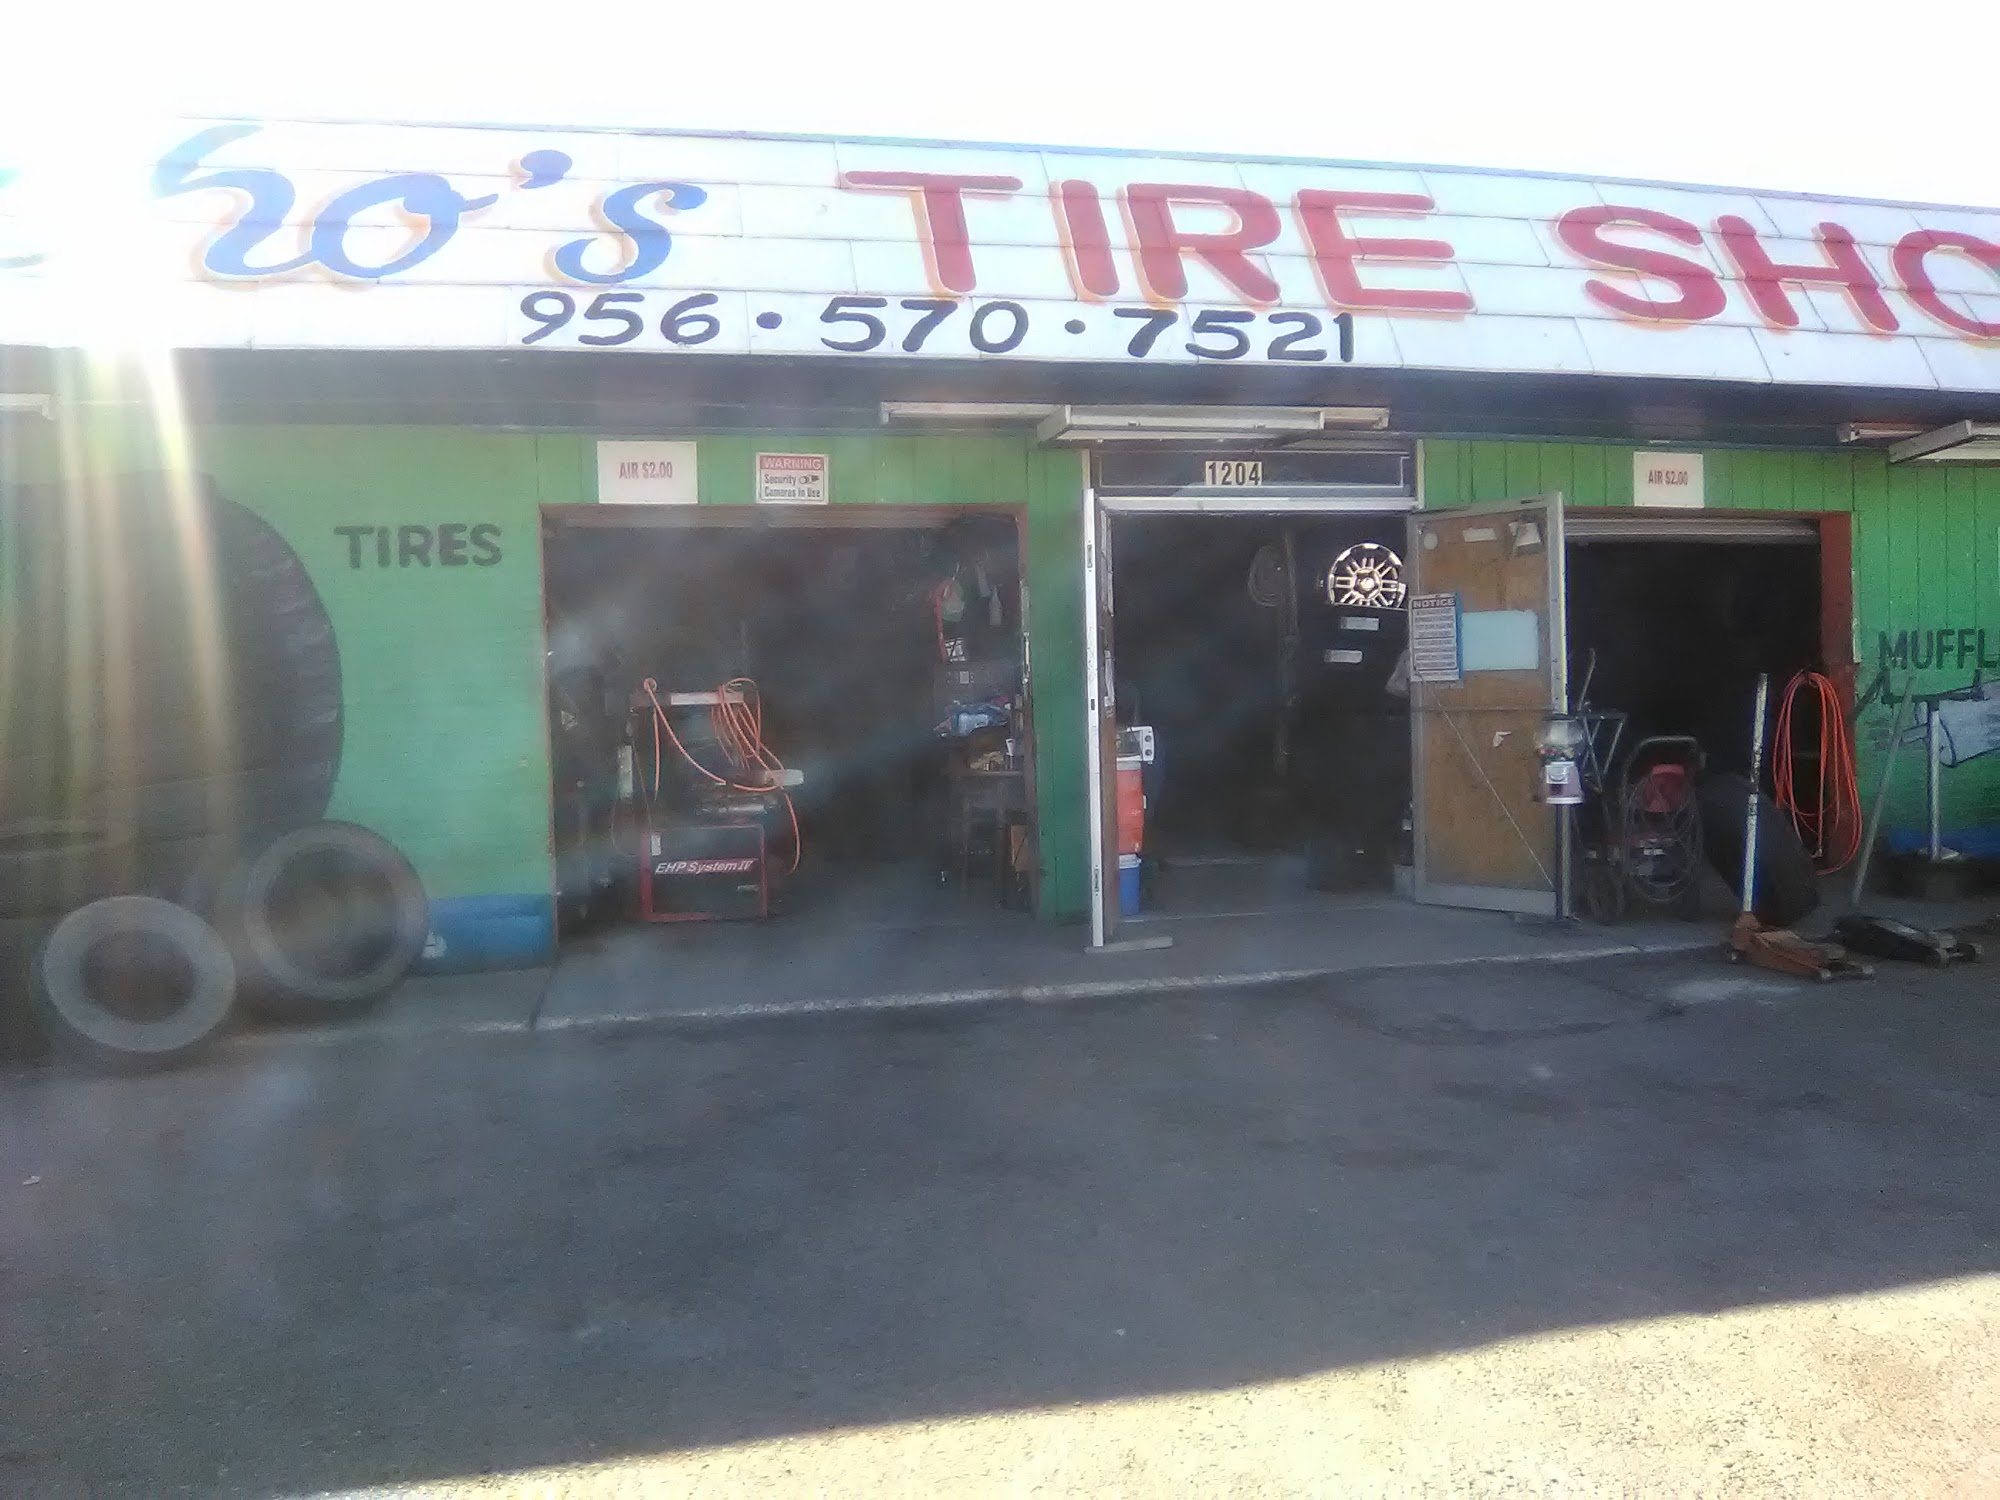 Chacho's Tires & carwash